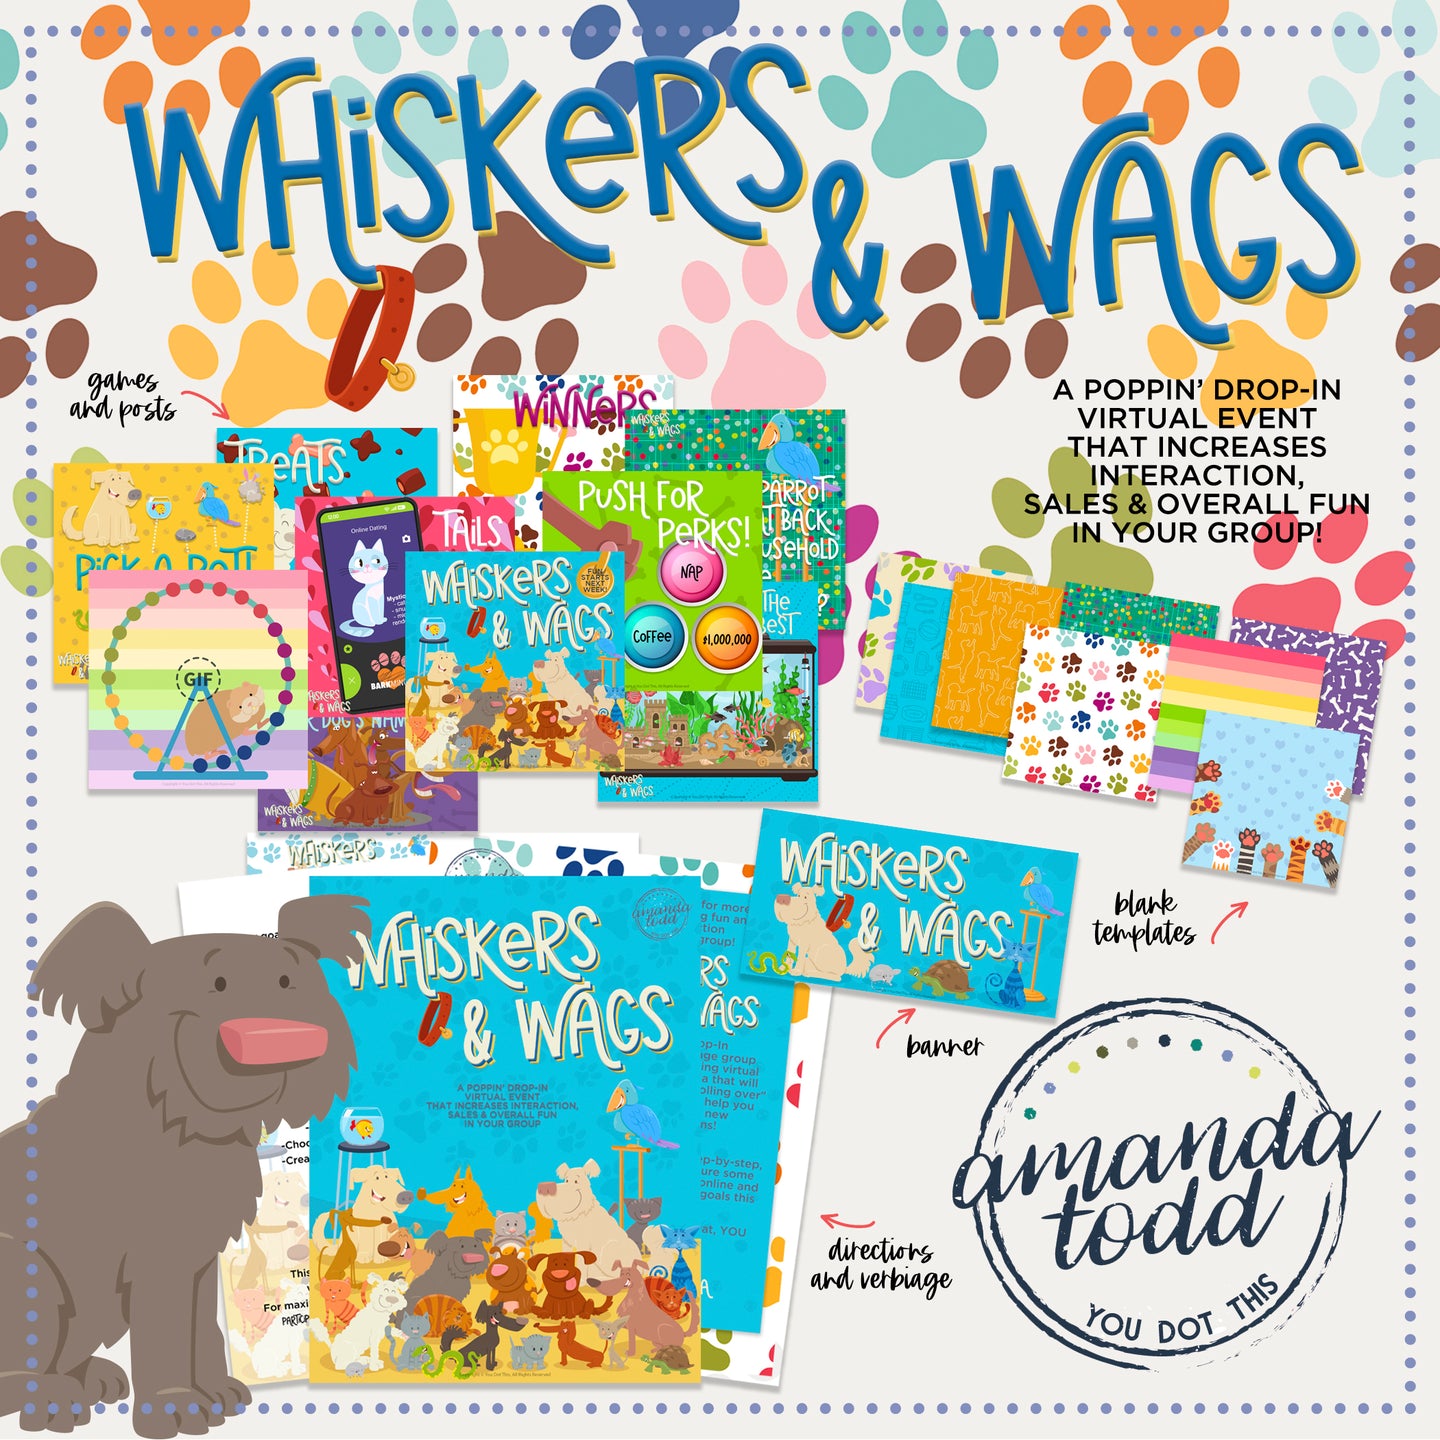 WHISKERS & WAGS POPPIN' DROP-IN